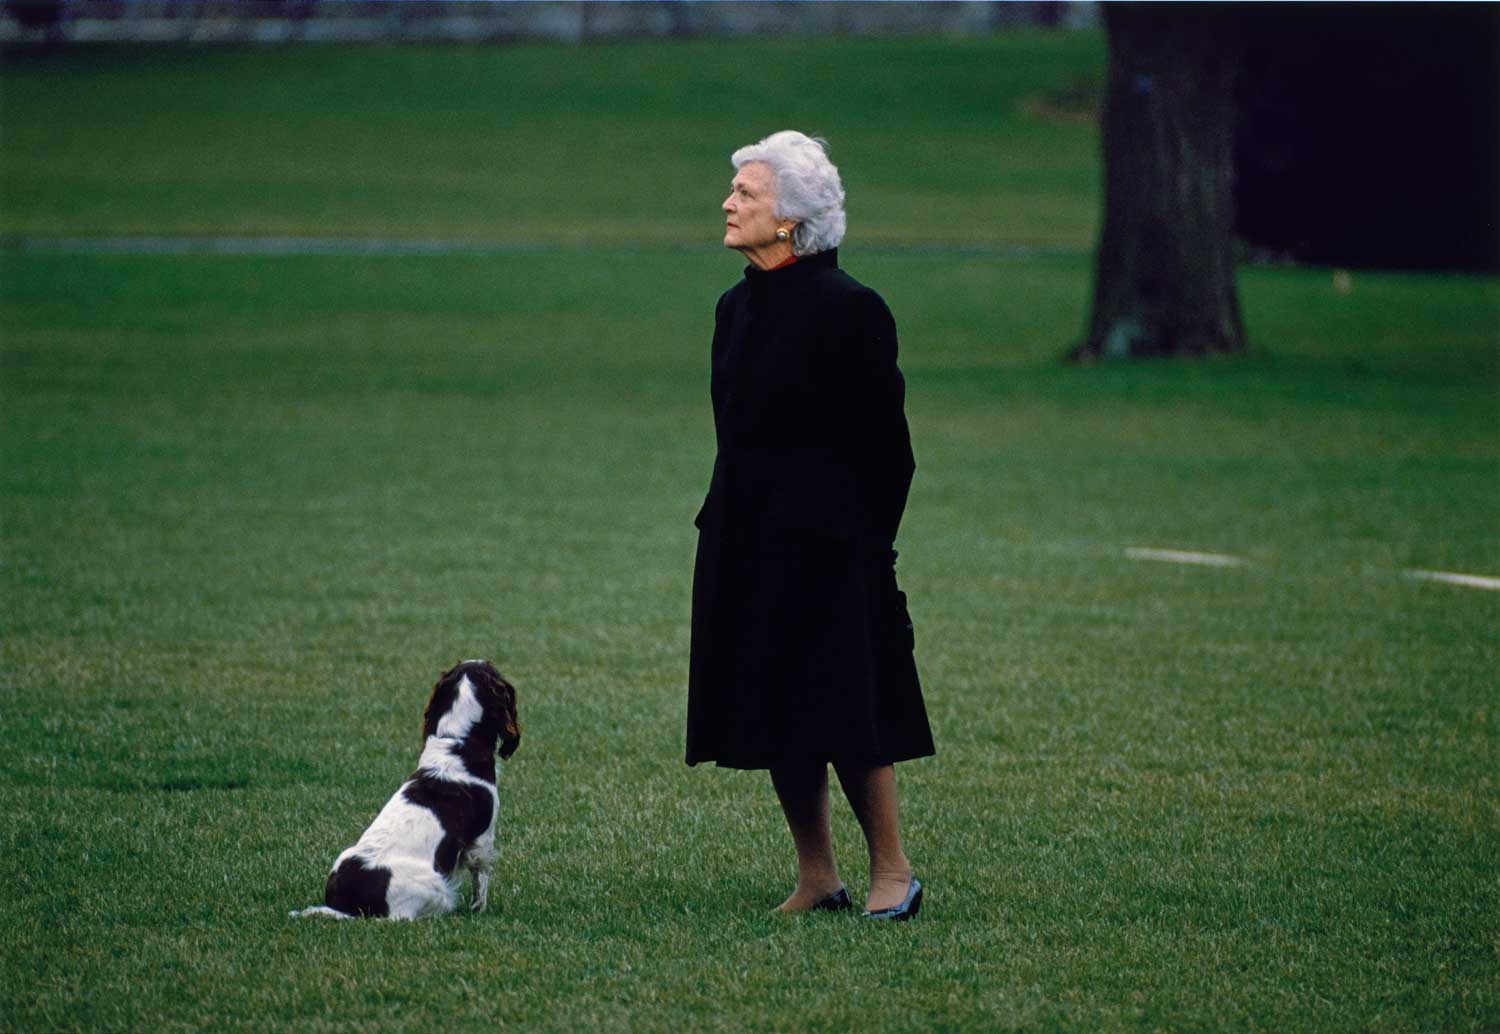 A photograph of a woman wearing a black dress and standing next to a dog outside